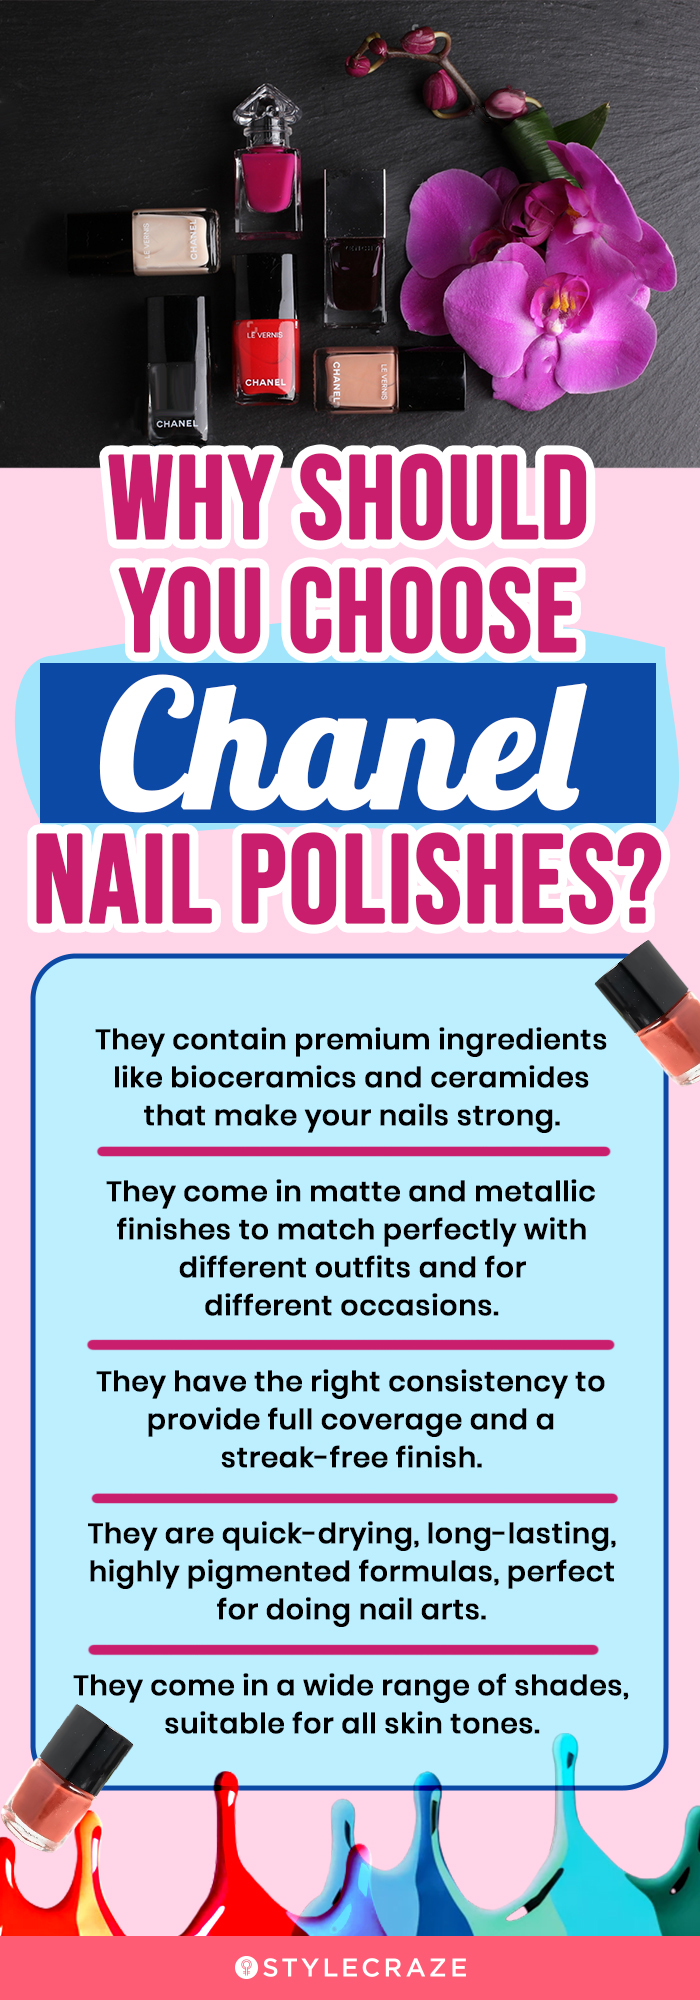 Why Should You Choose Chanel Nail Polishes? (infographic)